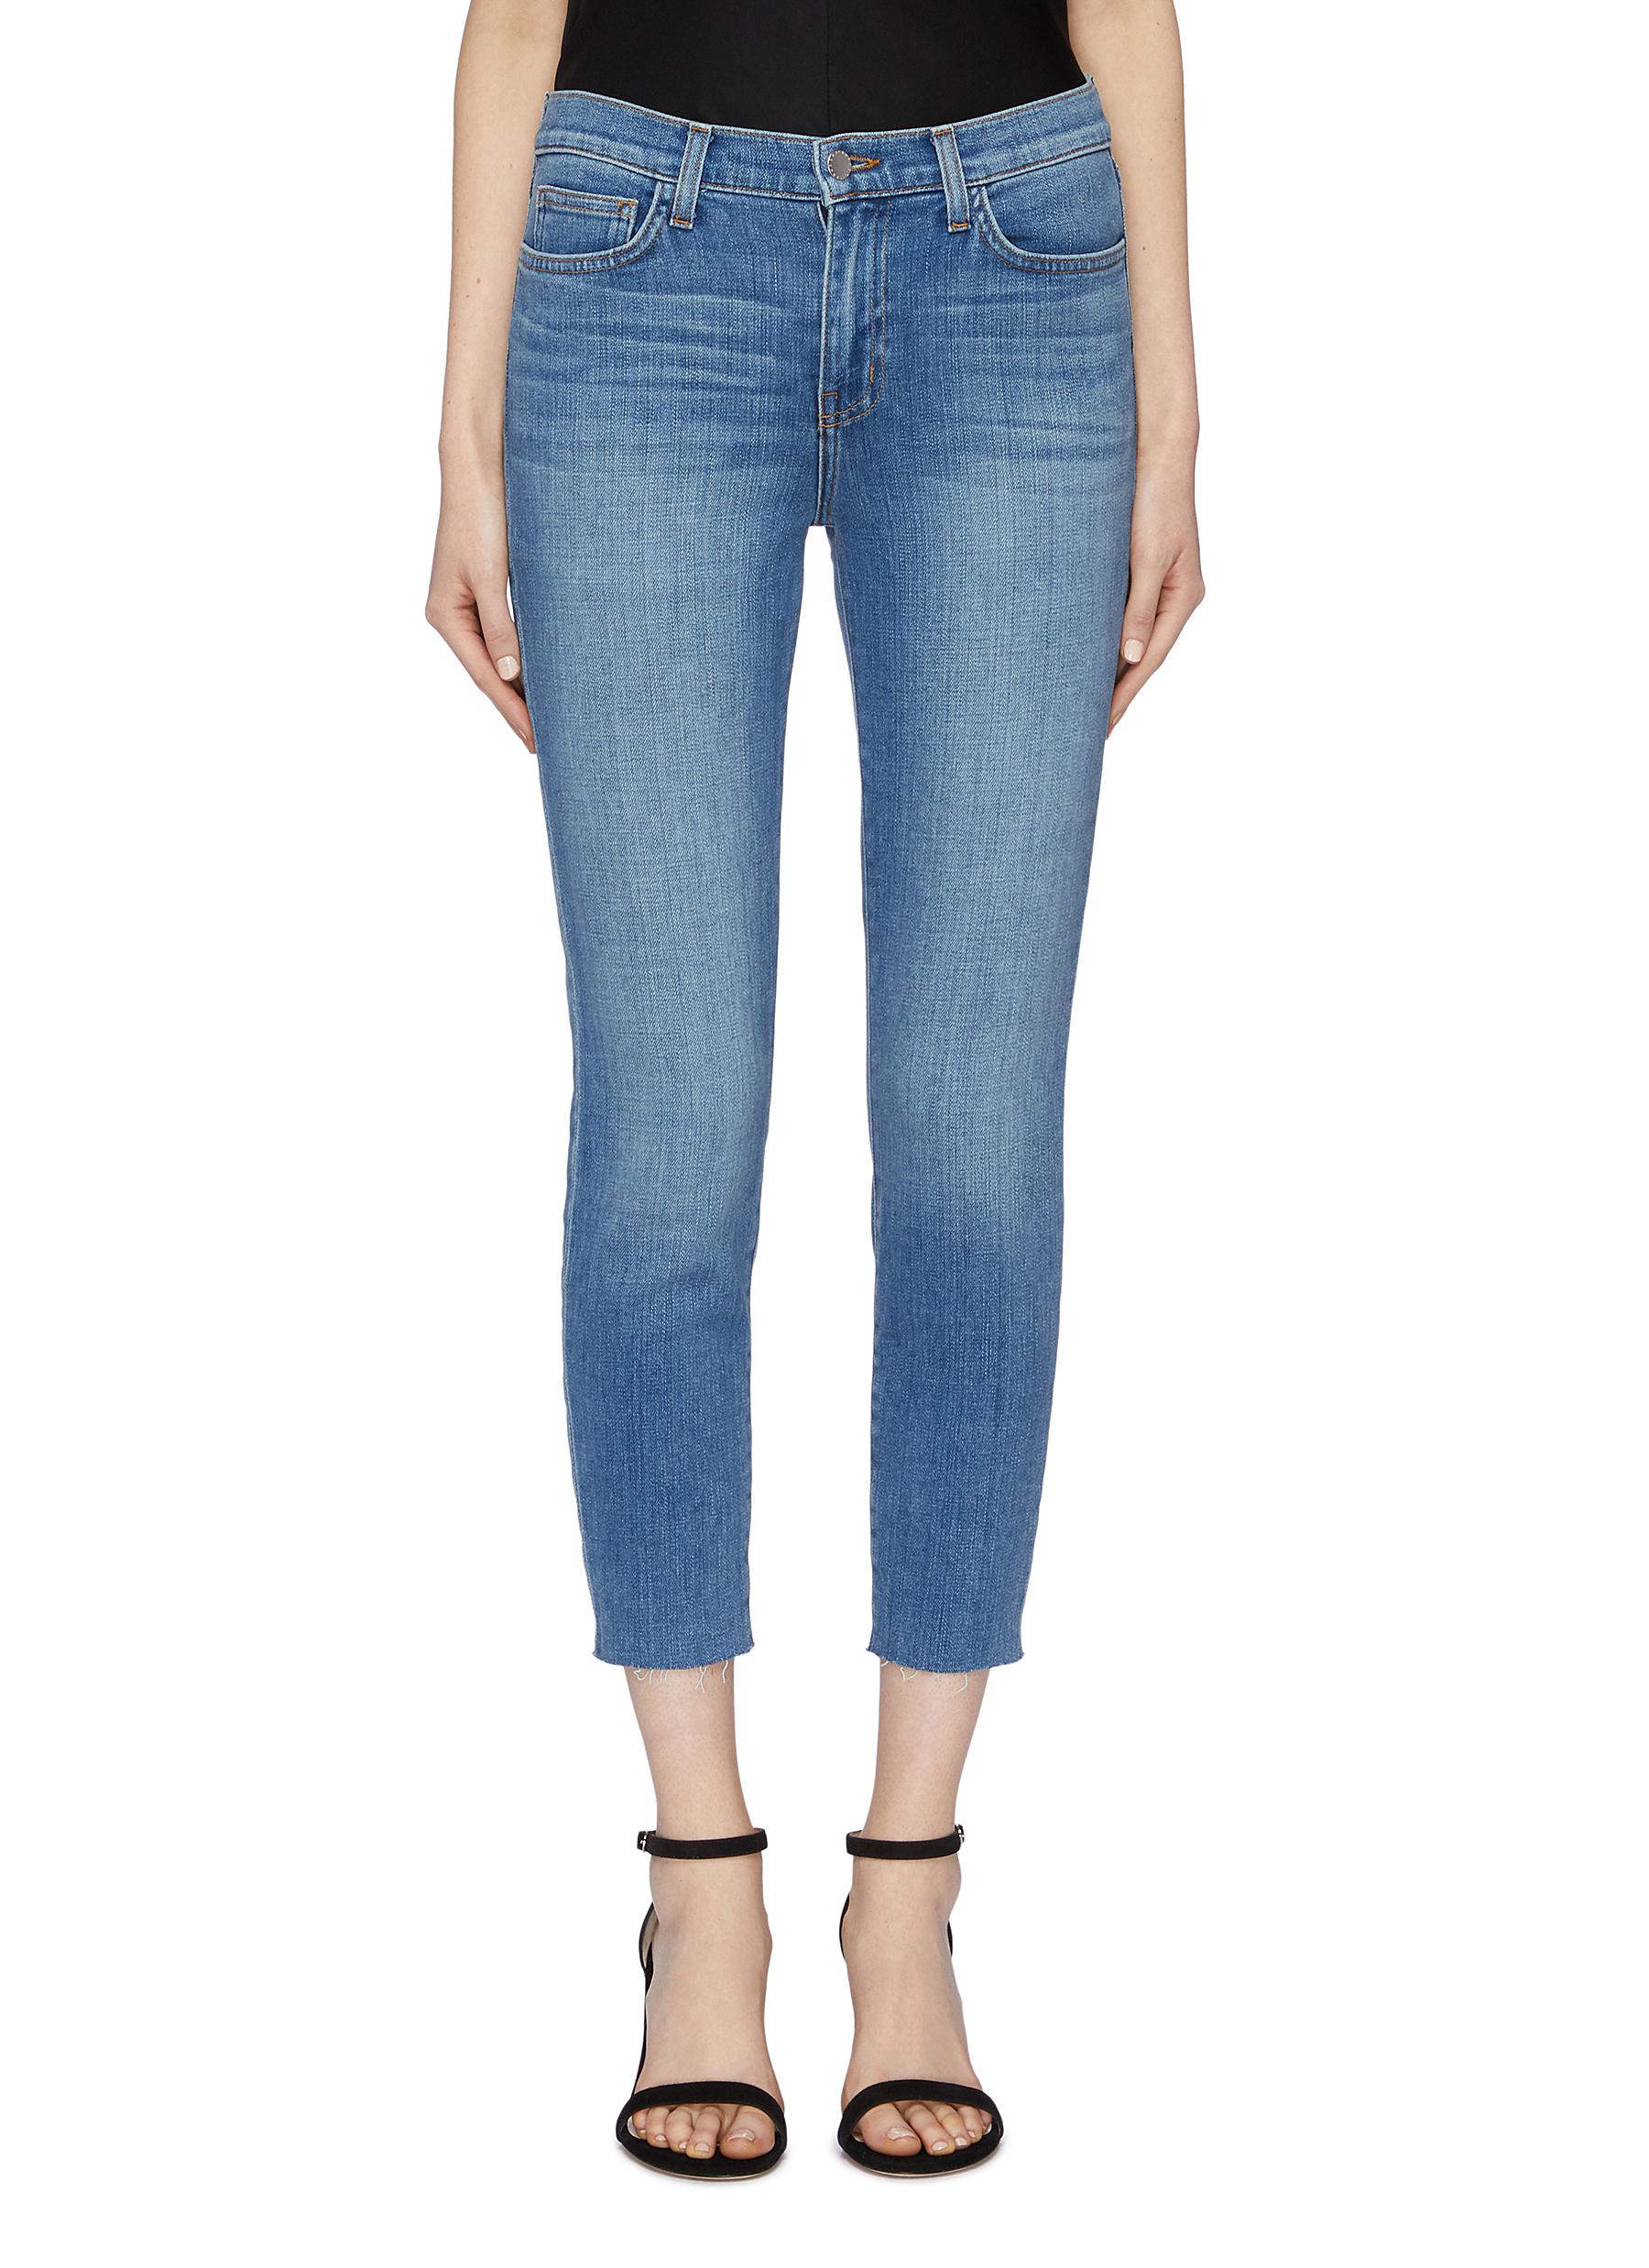 El Matador cropped skinny jeans by L'Agence